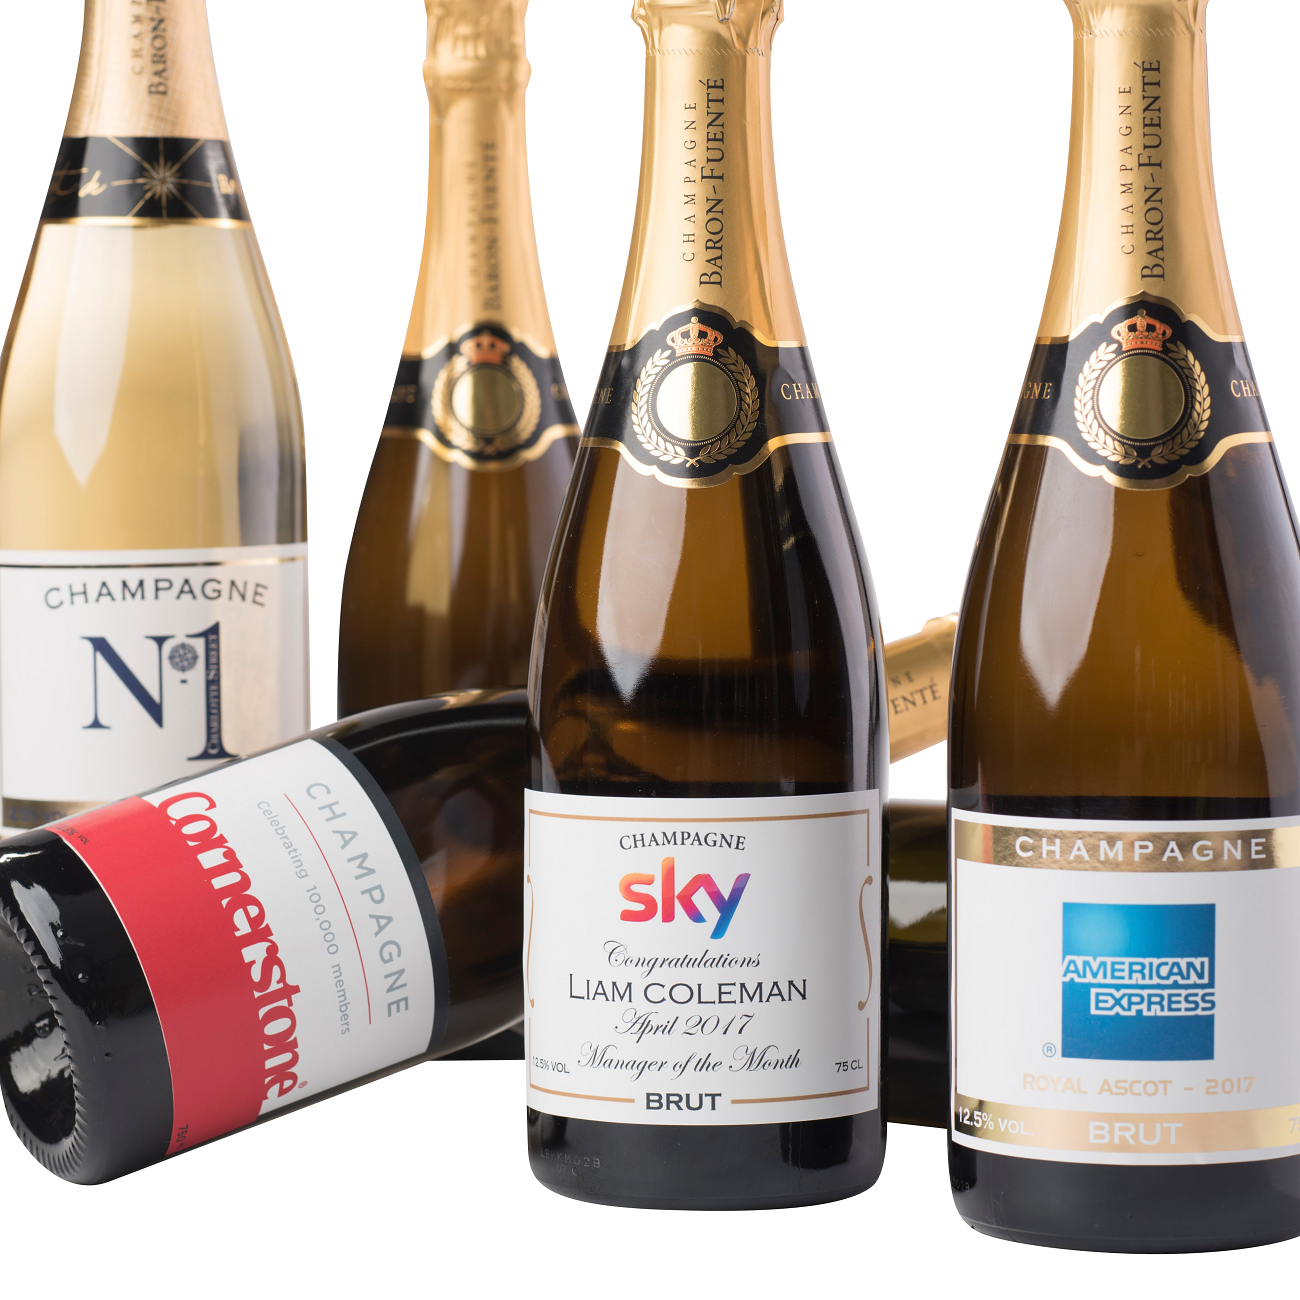 corporate champagne bottles showing different labels